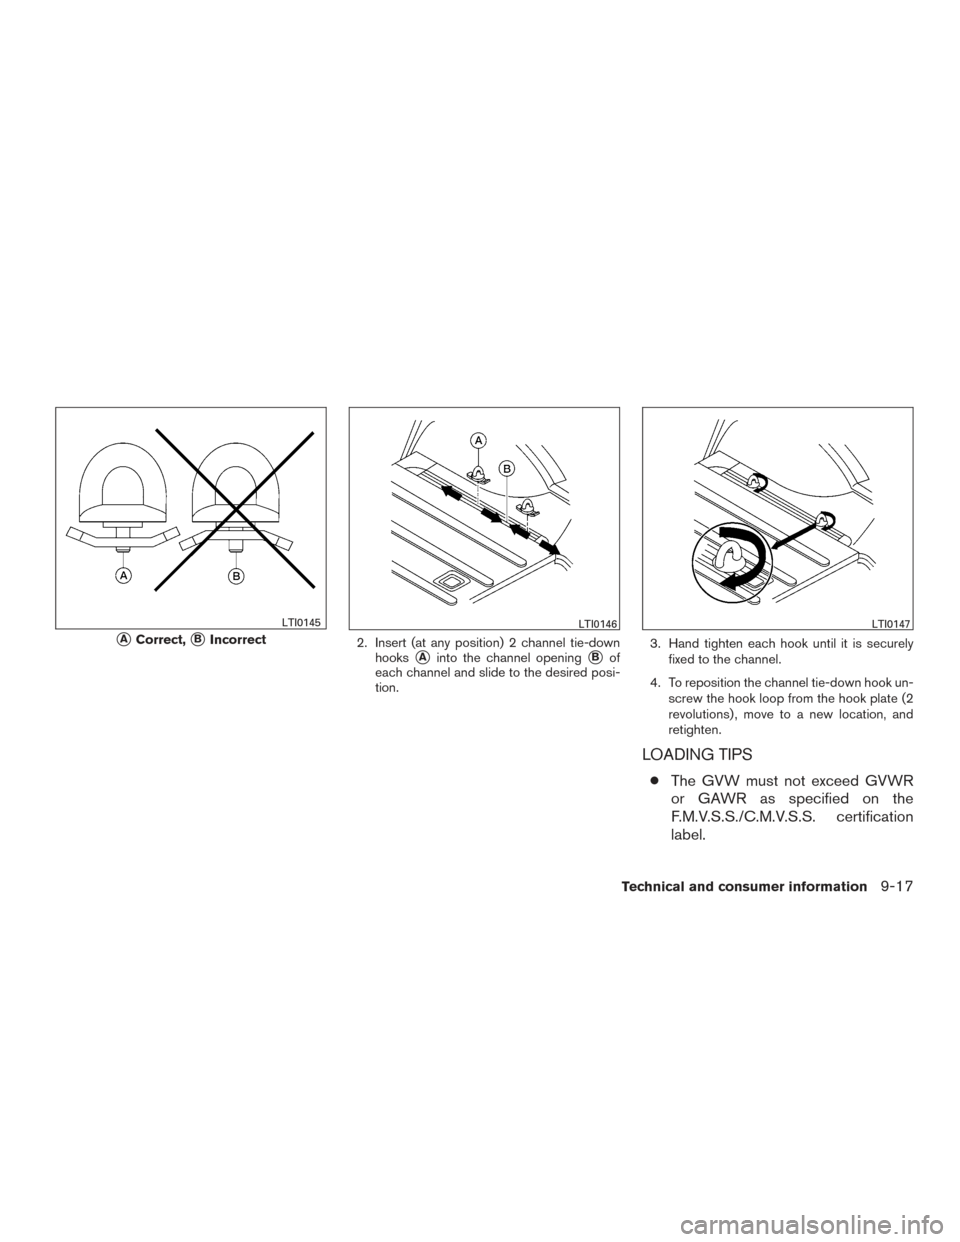 NISSAN XTERRA 2015 N50 / 2.G Owners Manual 2. Insert (at any position) 2 channel tie-downhooks
Ainto the channel openingBof
each channel and slide to the desired posi-
tion. 3. Hand tighten each hook until it is securely
fixed to the channel